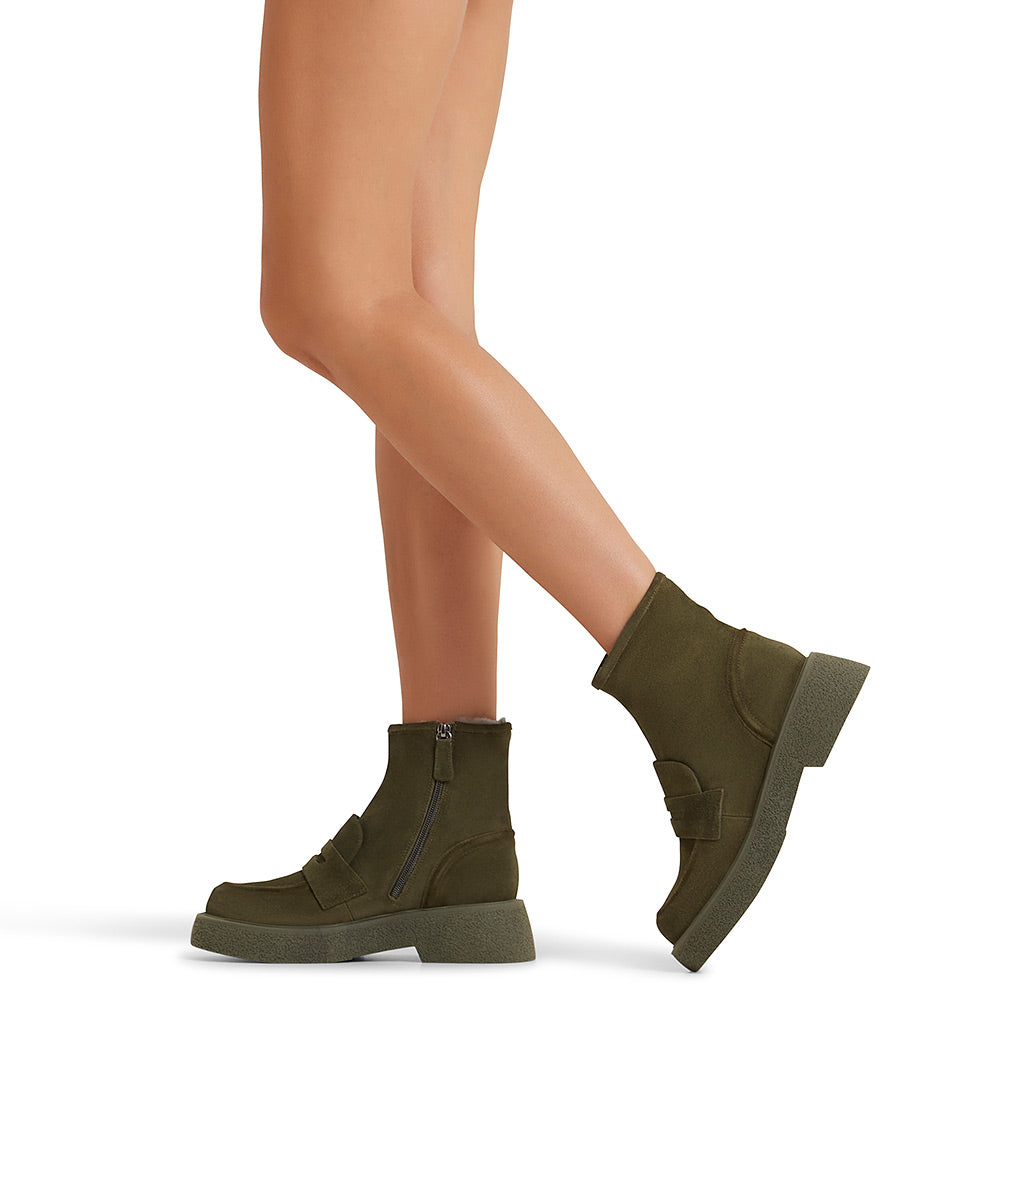 Shearling lined green suede ankle boots